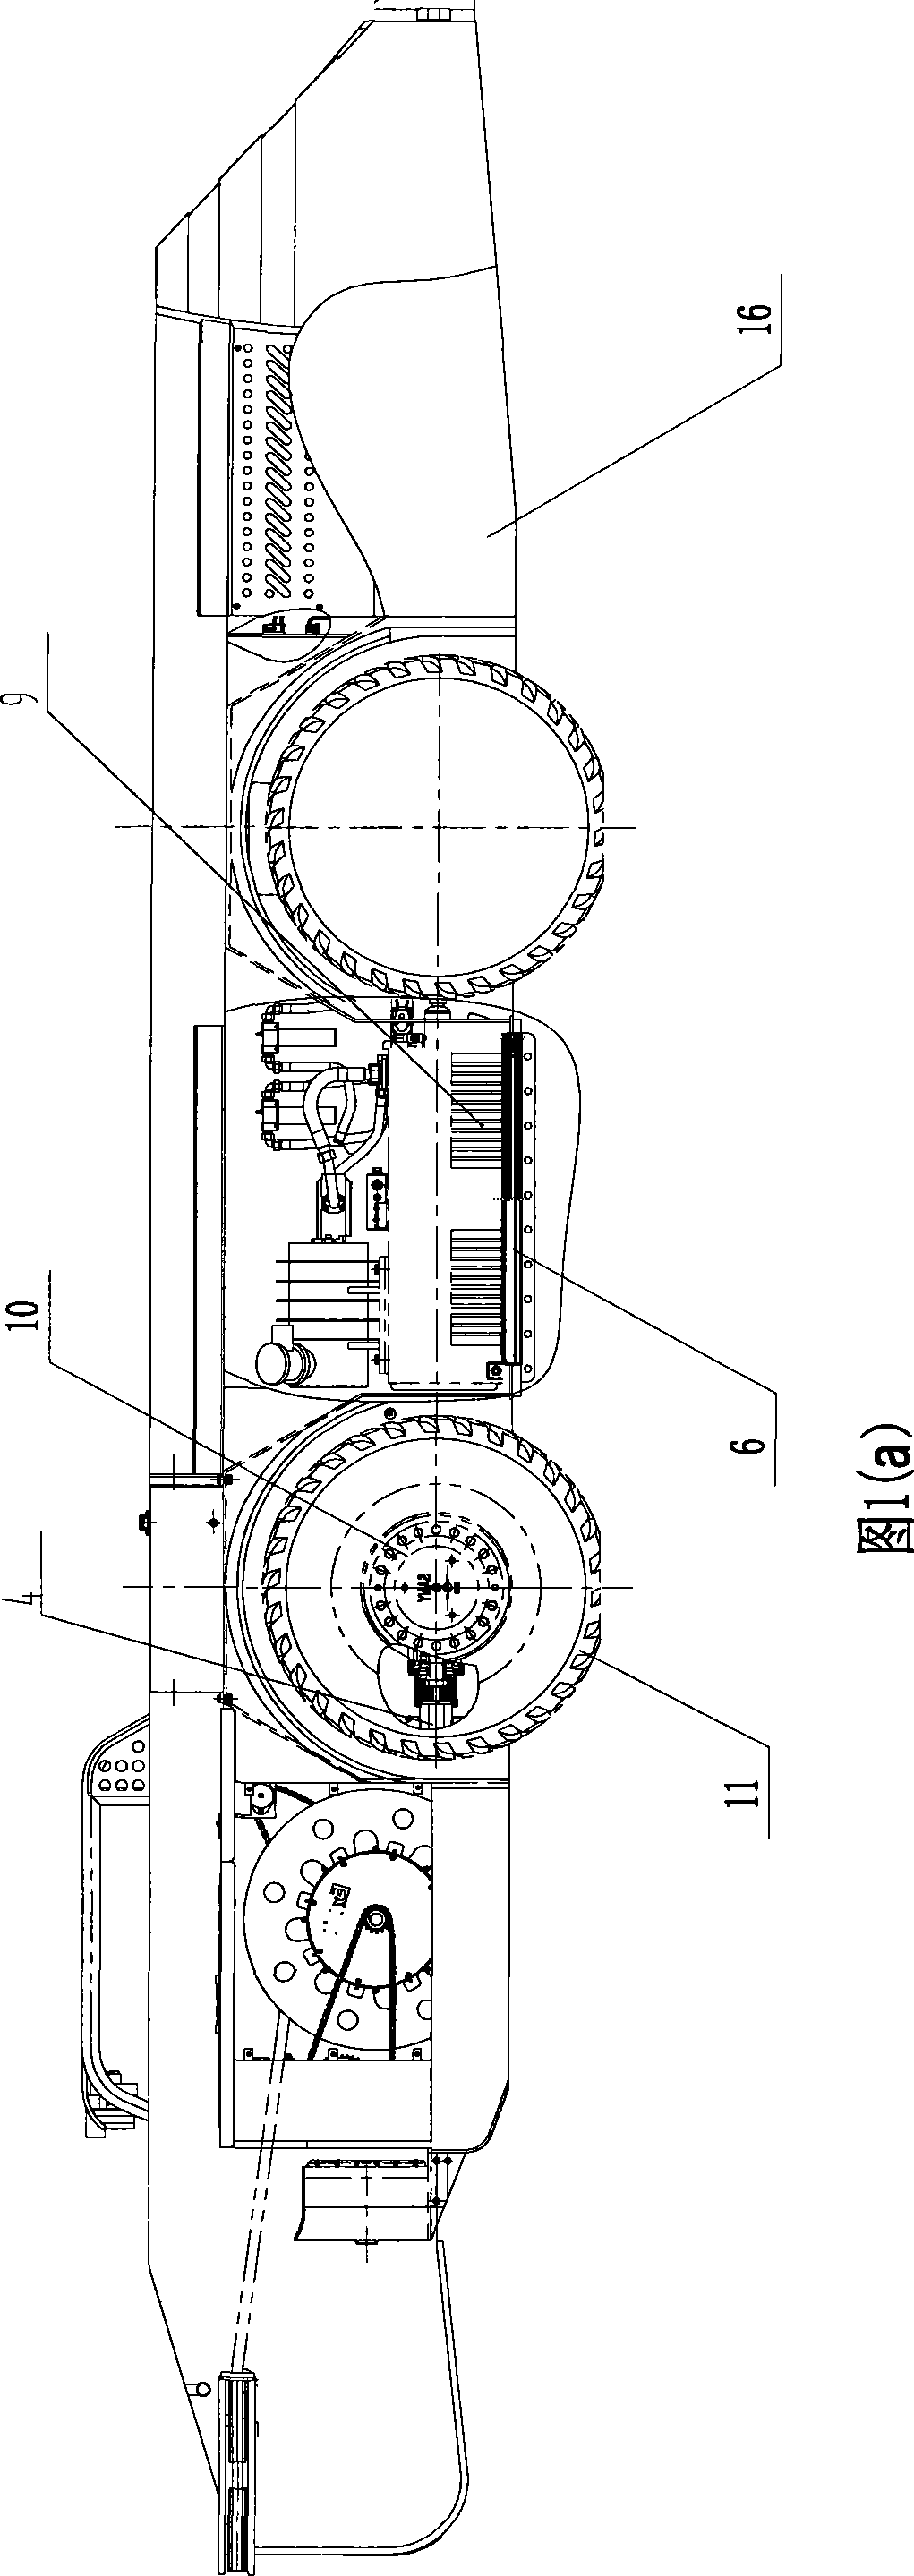 Cooling device for variable frequency controller